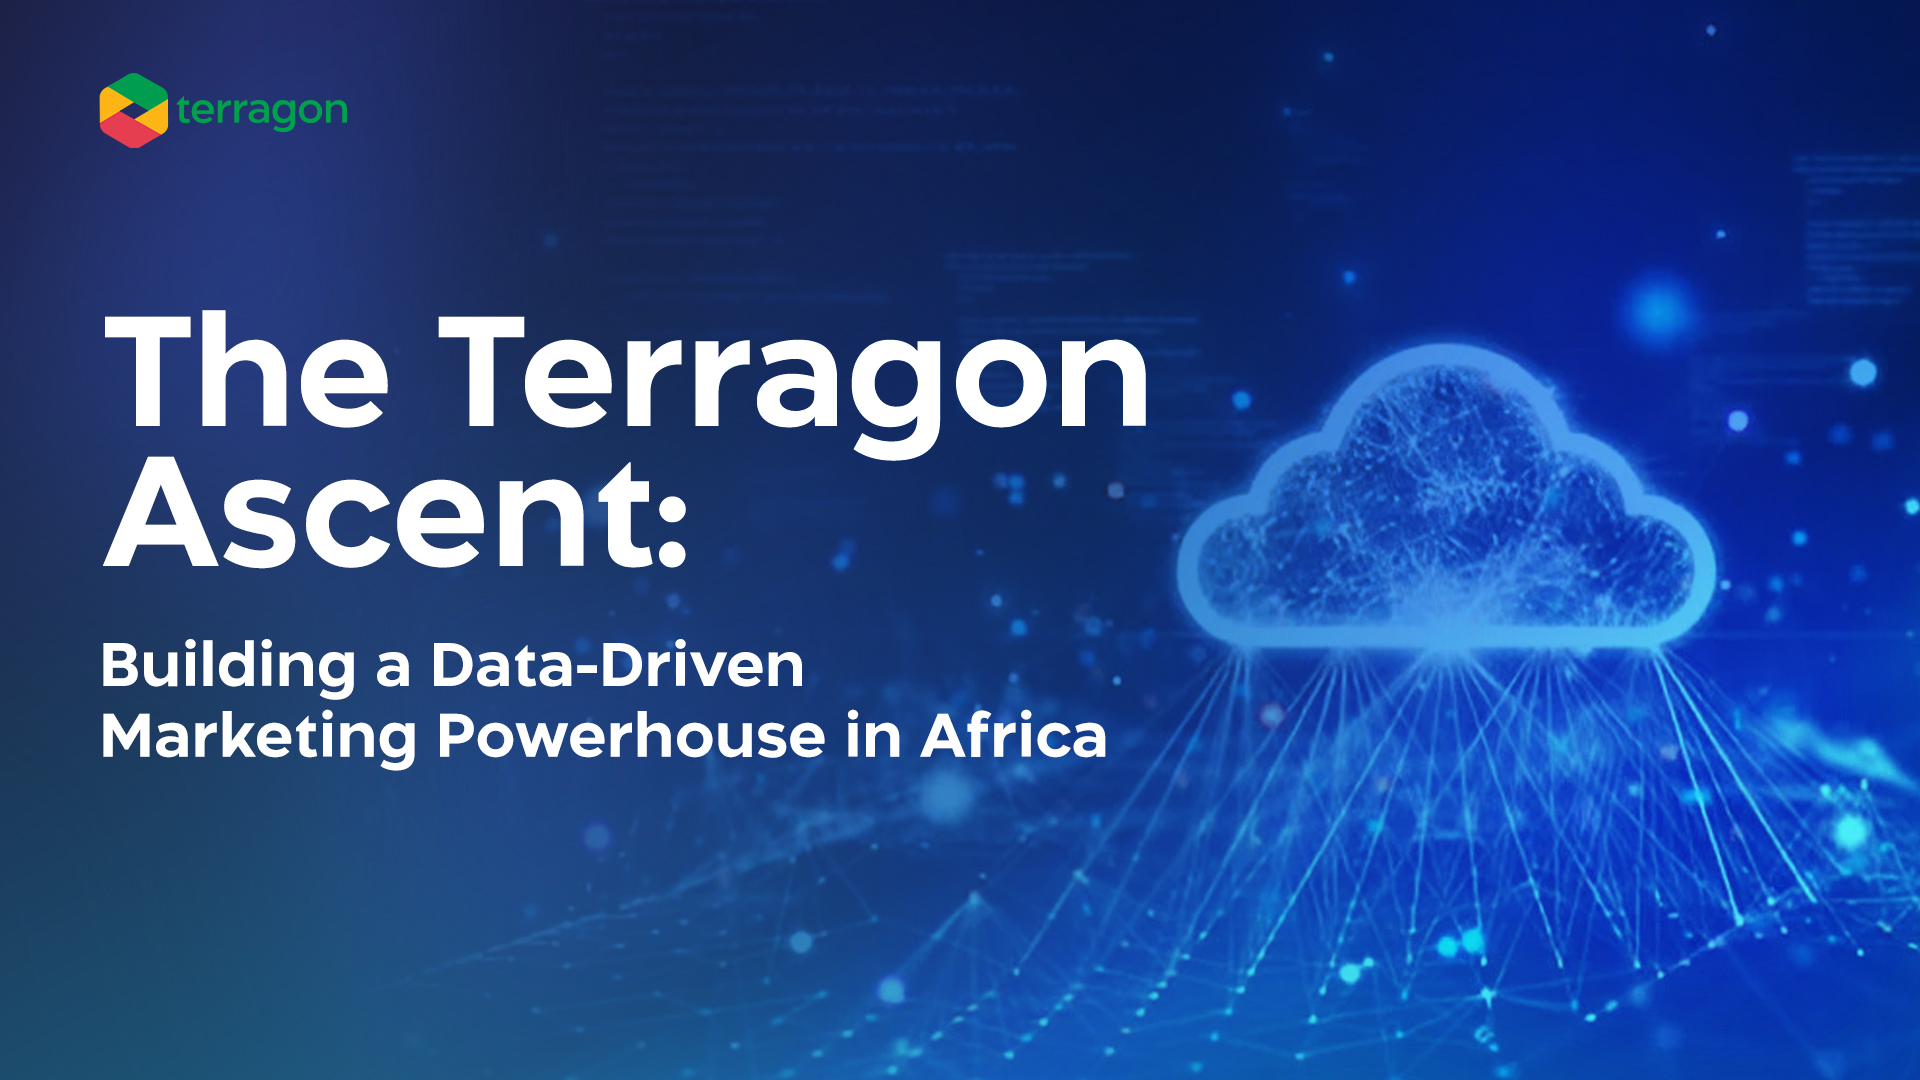 Building a Data-Driven Marketing Powerhouse in Africa